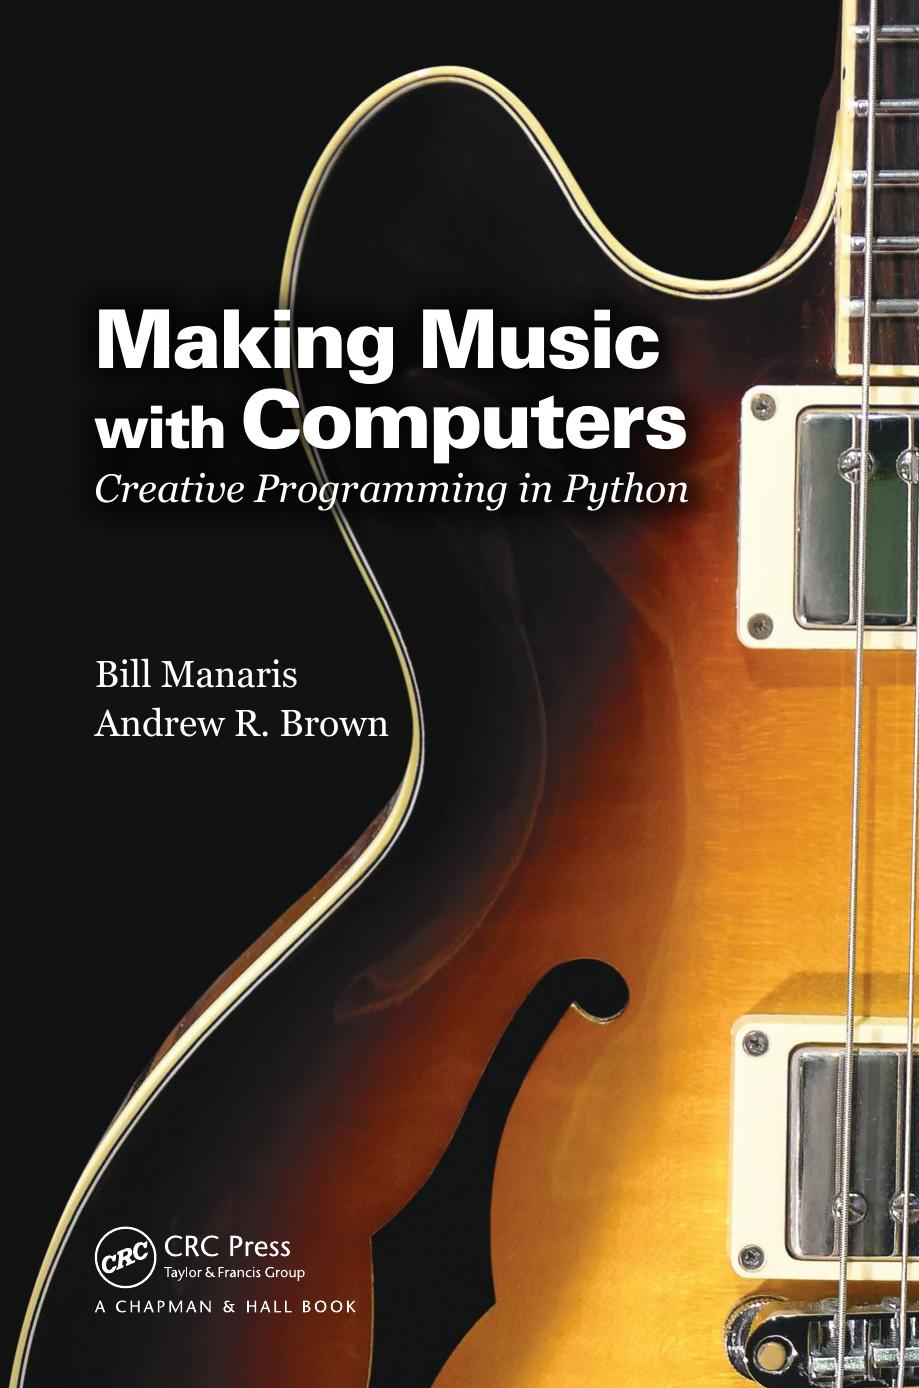 Making Music with Computers - Creative Programming in Python